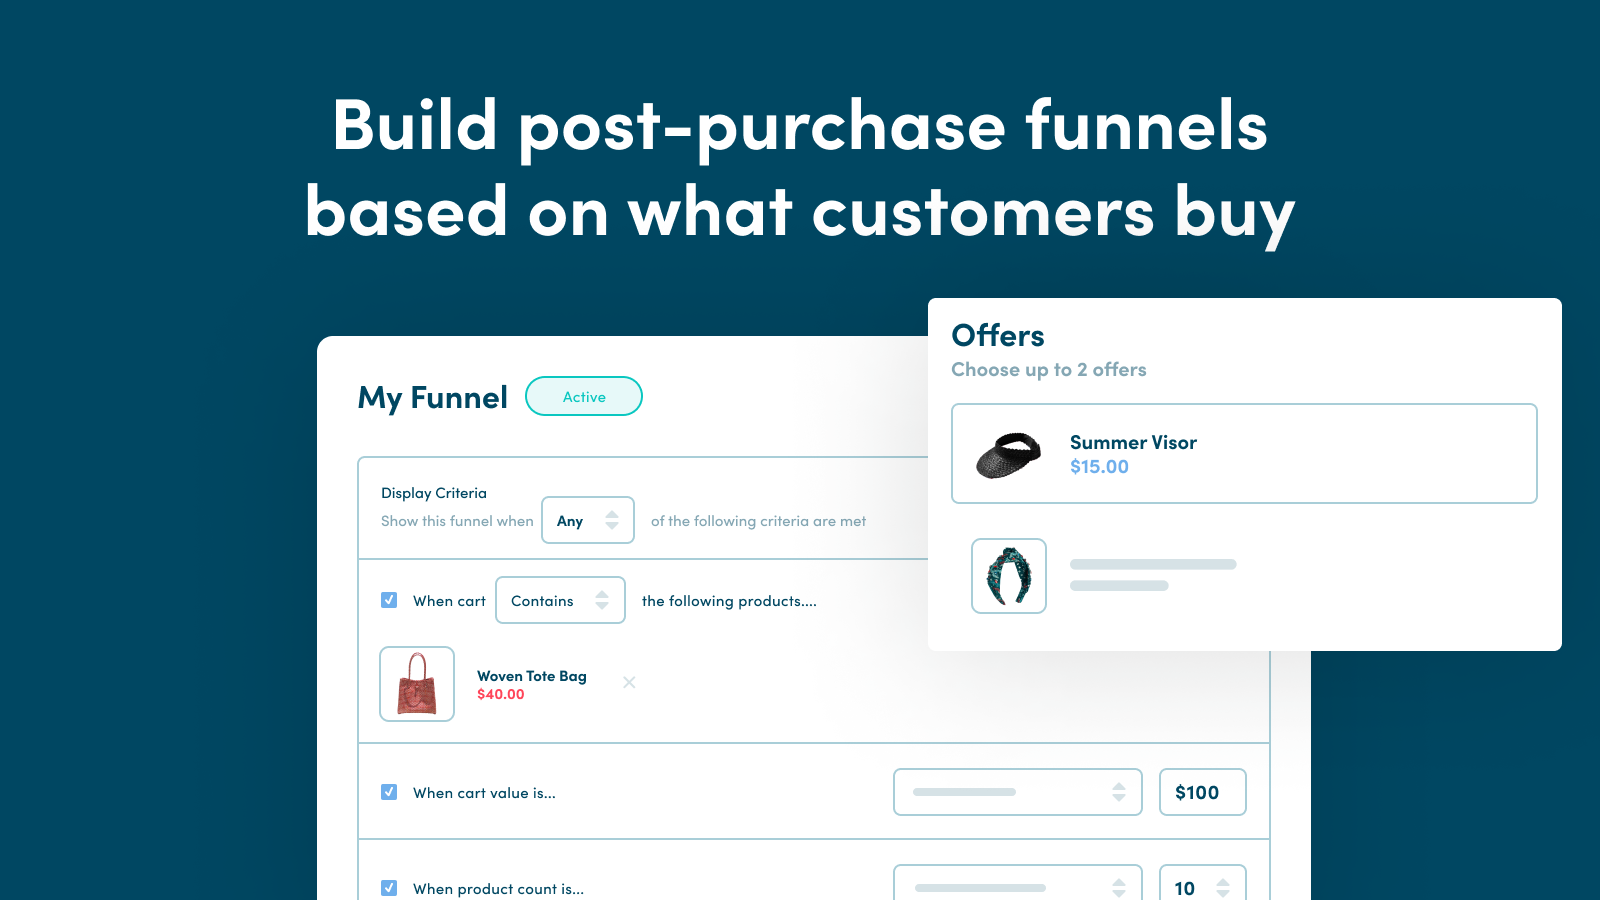 Build post-purchase funnels based on what customers buy